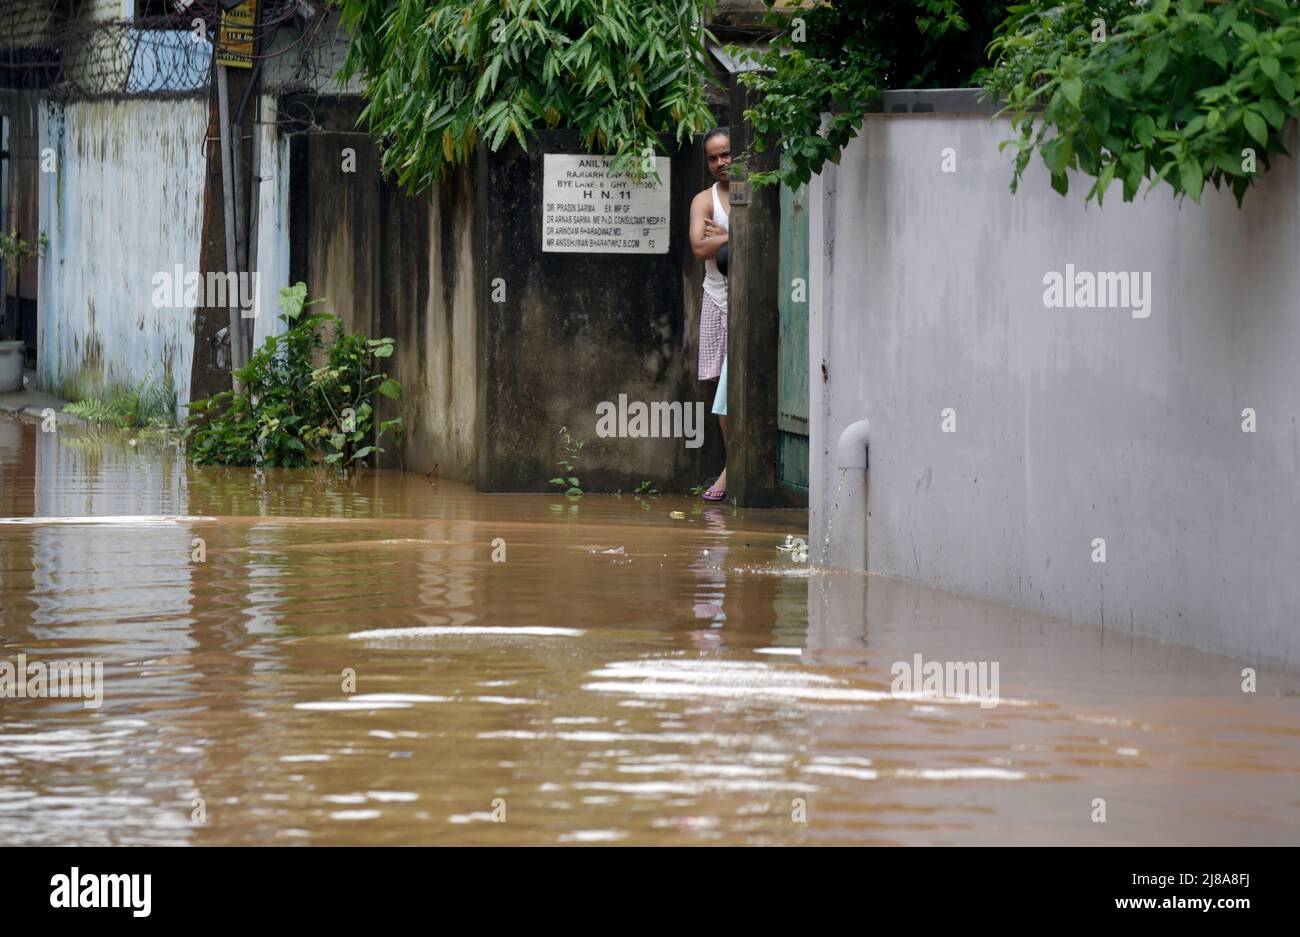 Commuters Make Their Way On A Waterlogged Street After A Heavy Rainfall In Guwahati India On 14